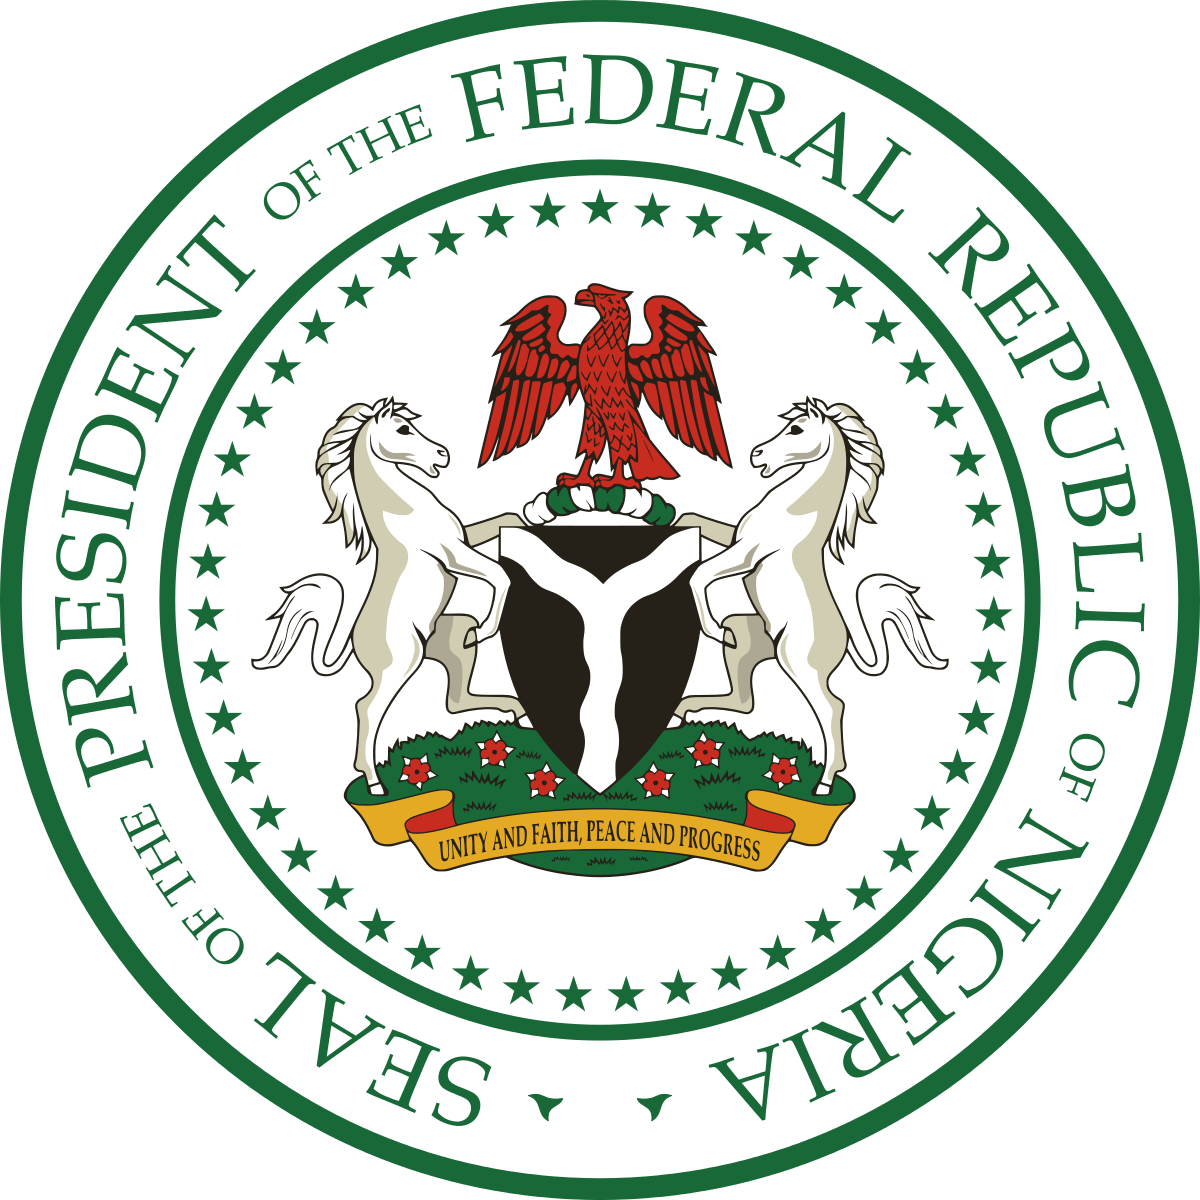 Nigeria: President Tinubu Nominates New Minister for Federal Ministry of Youth